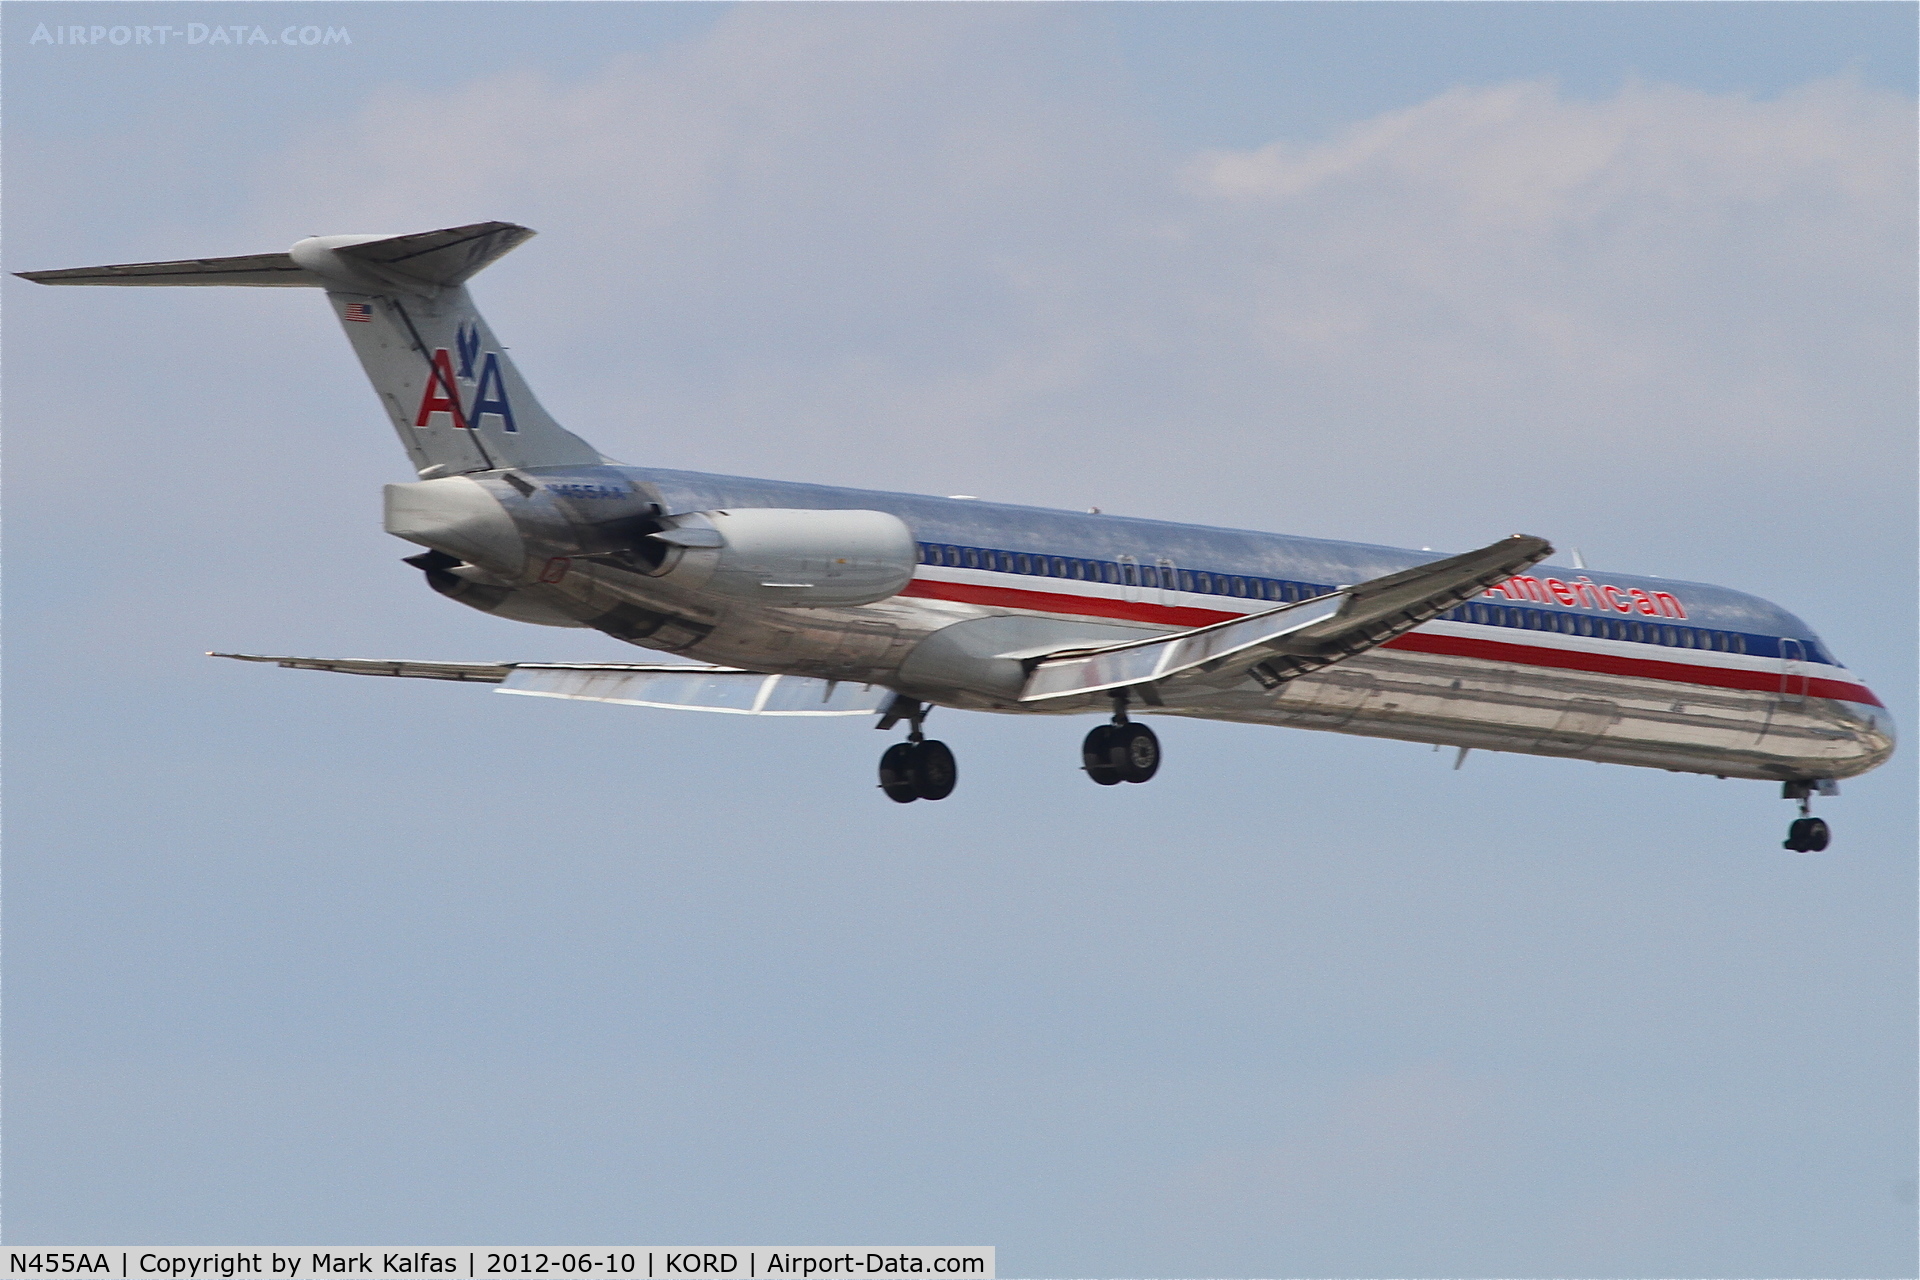 N455AA, 1988 McDonnell Douglas MD-82 (DC-9-82) C/N 49560, American Airlines Mcdonnell Douglas DC-9-82, AAL2356 arriving from Dallas/Fort Worth Int'l /KDFW, RWY 10 approach KORD.